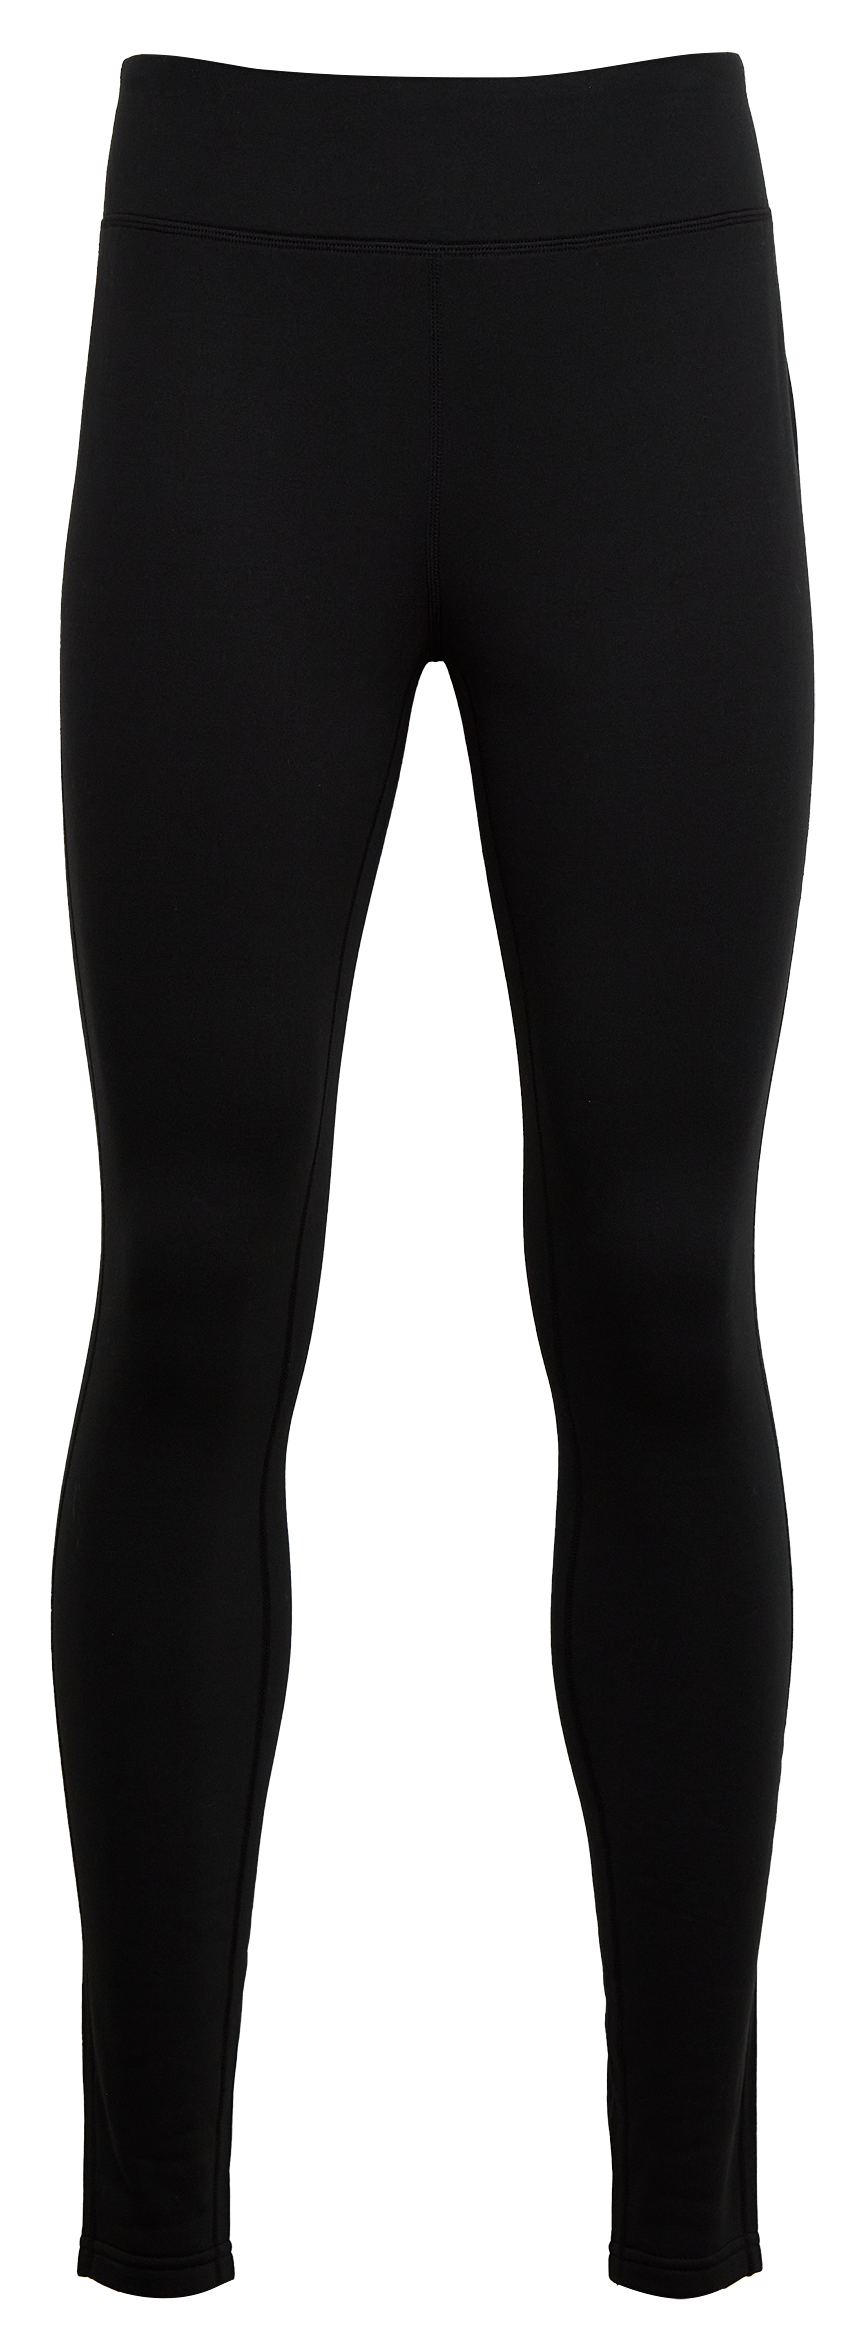 Natural Reflections Seamless Leggings for Ladies